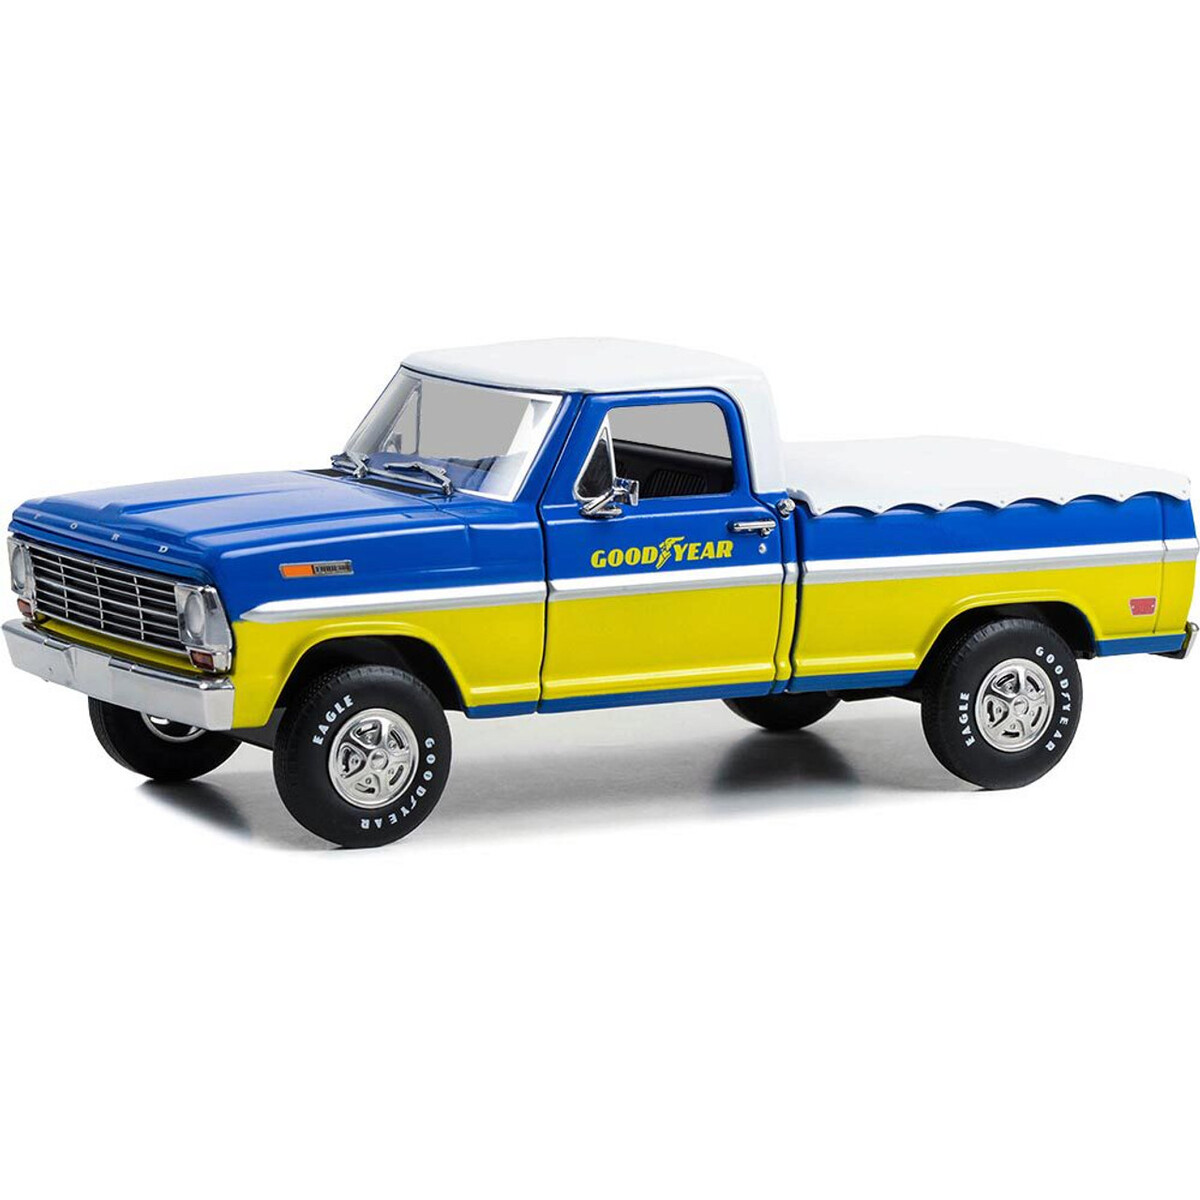 Greenlight 1/24 Running on Empty Series 6- 1969 Ford with Bed Cover - Goodyear Tires 85070-C - Thumbnail